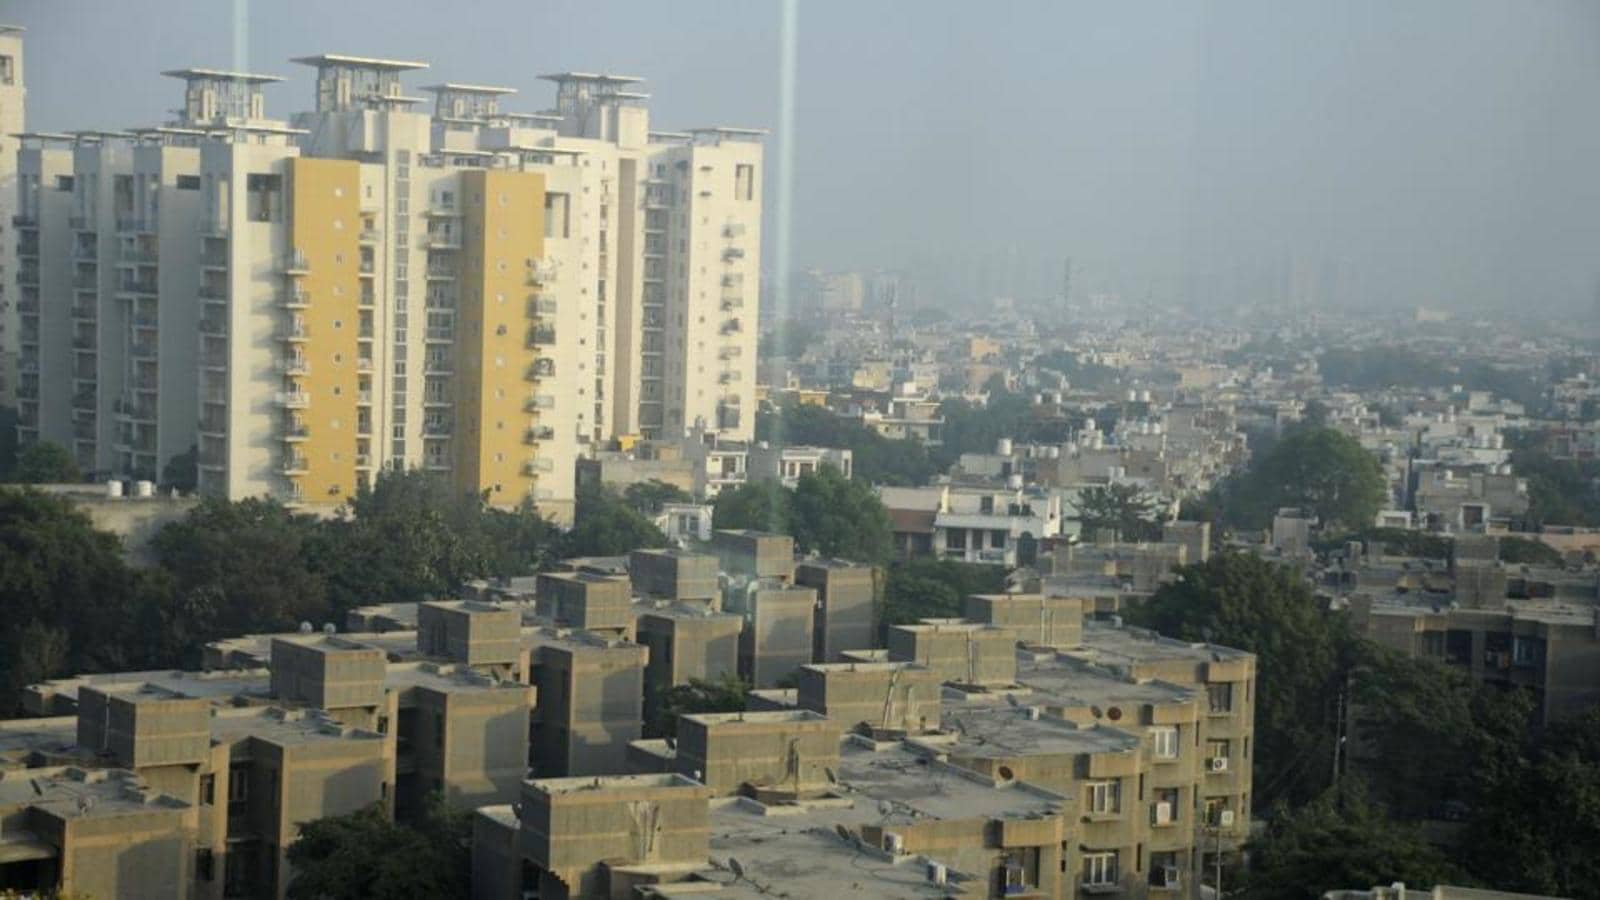 Share of Independent Floors in Total Housing Launch in Gurgaon reached 74% in 2021 Report